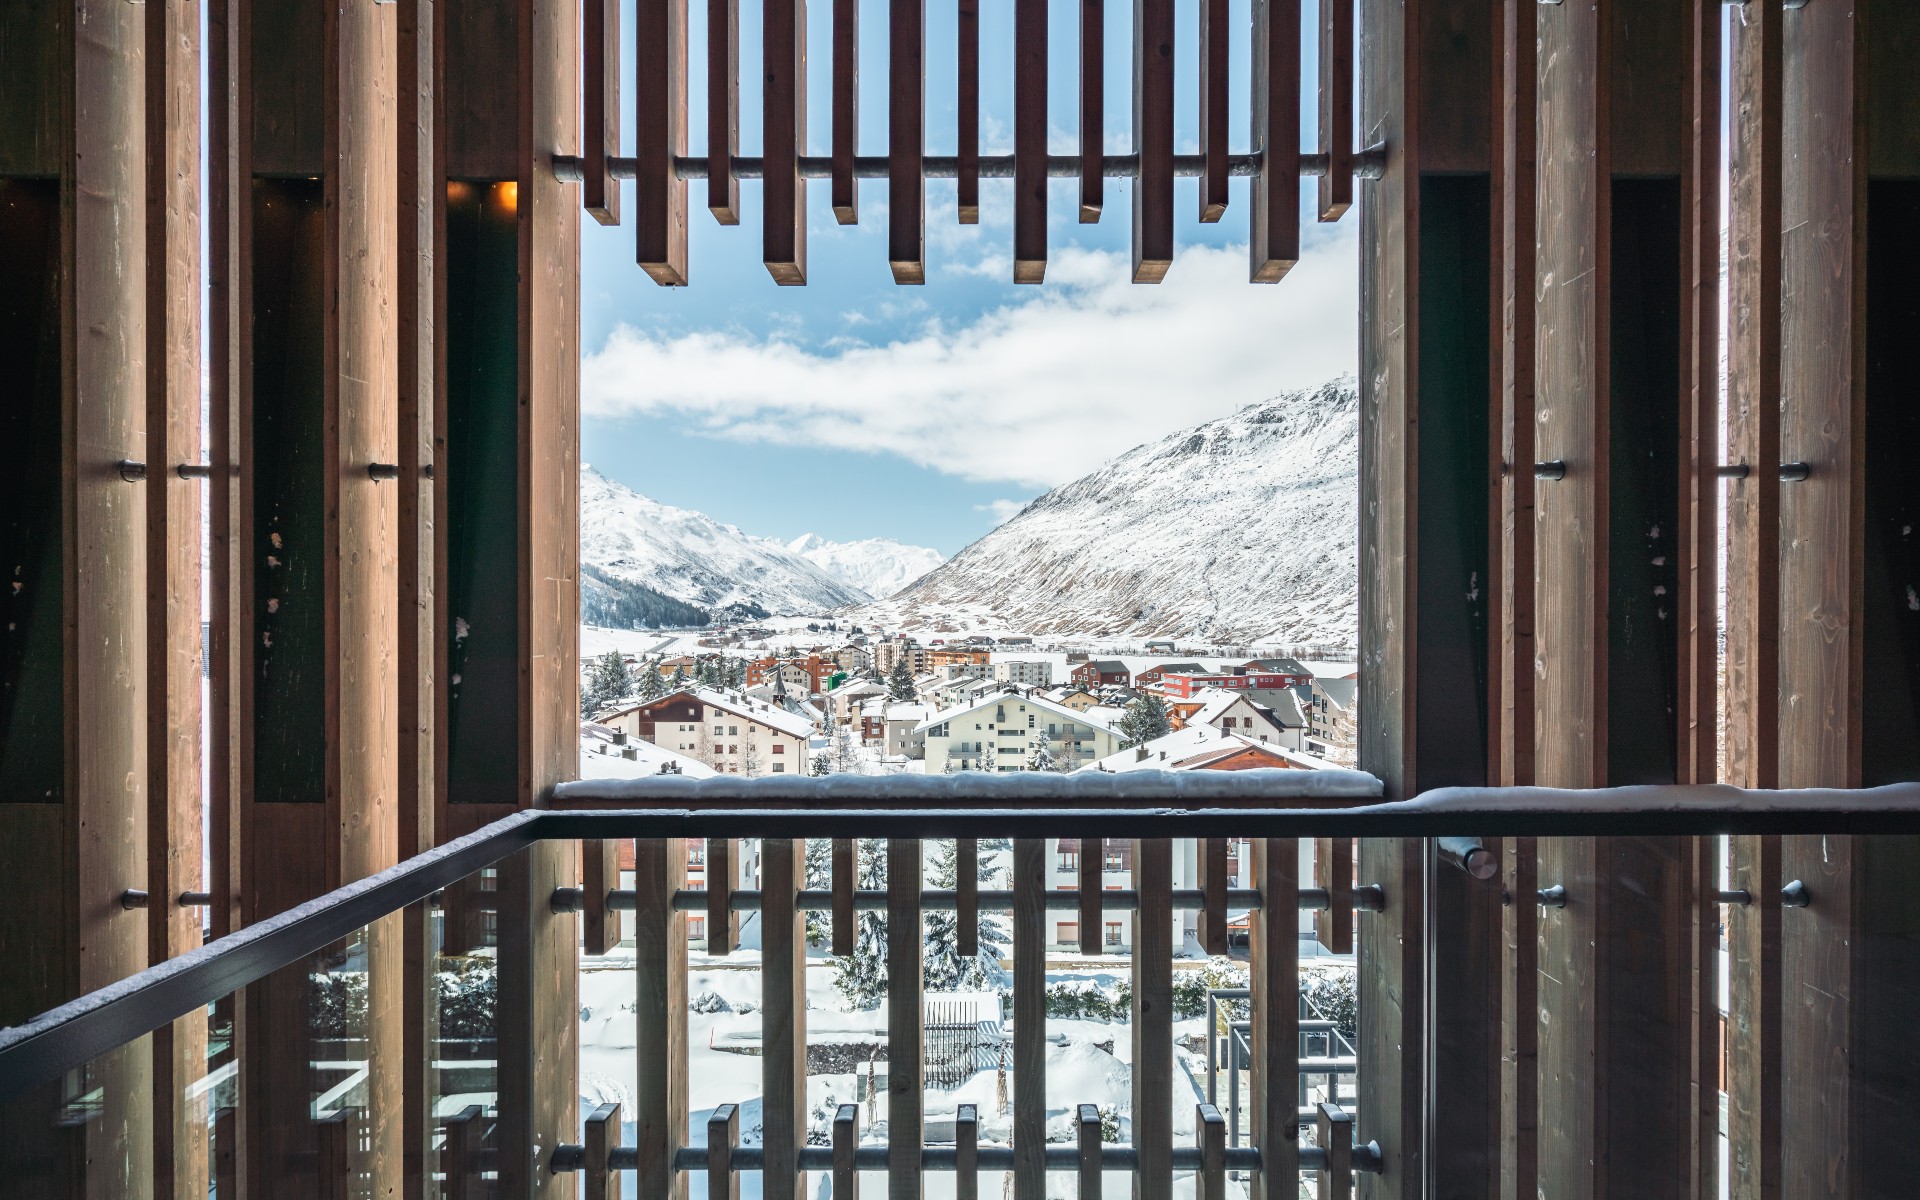 View of a balcony from the chedi on the village and the mountains in the background. Winter landscape.